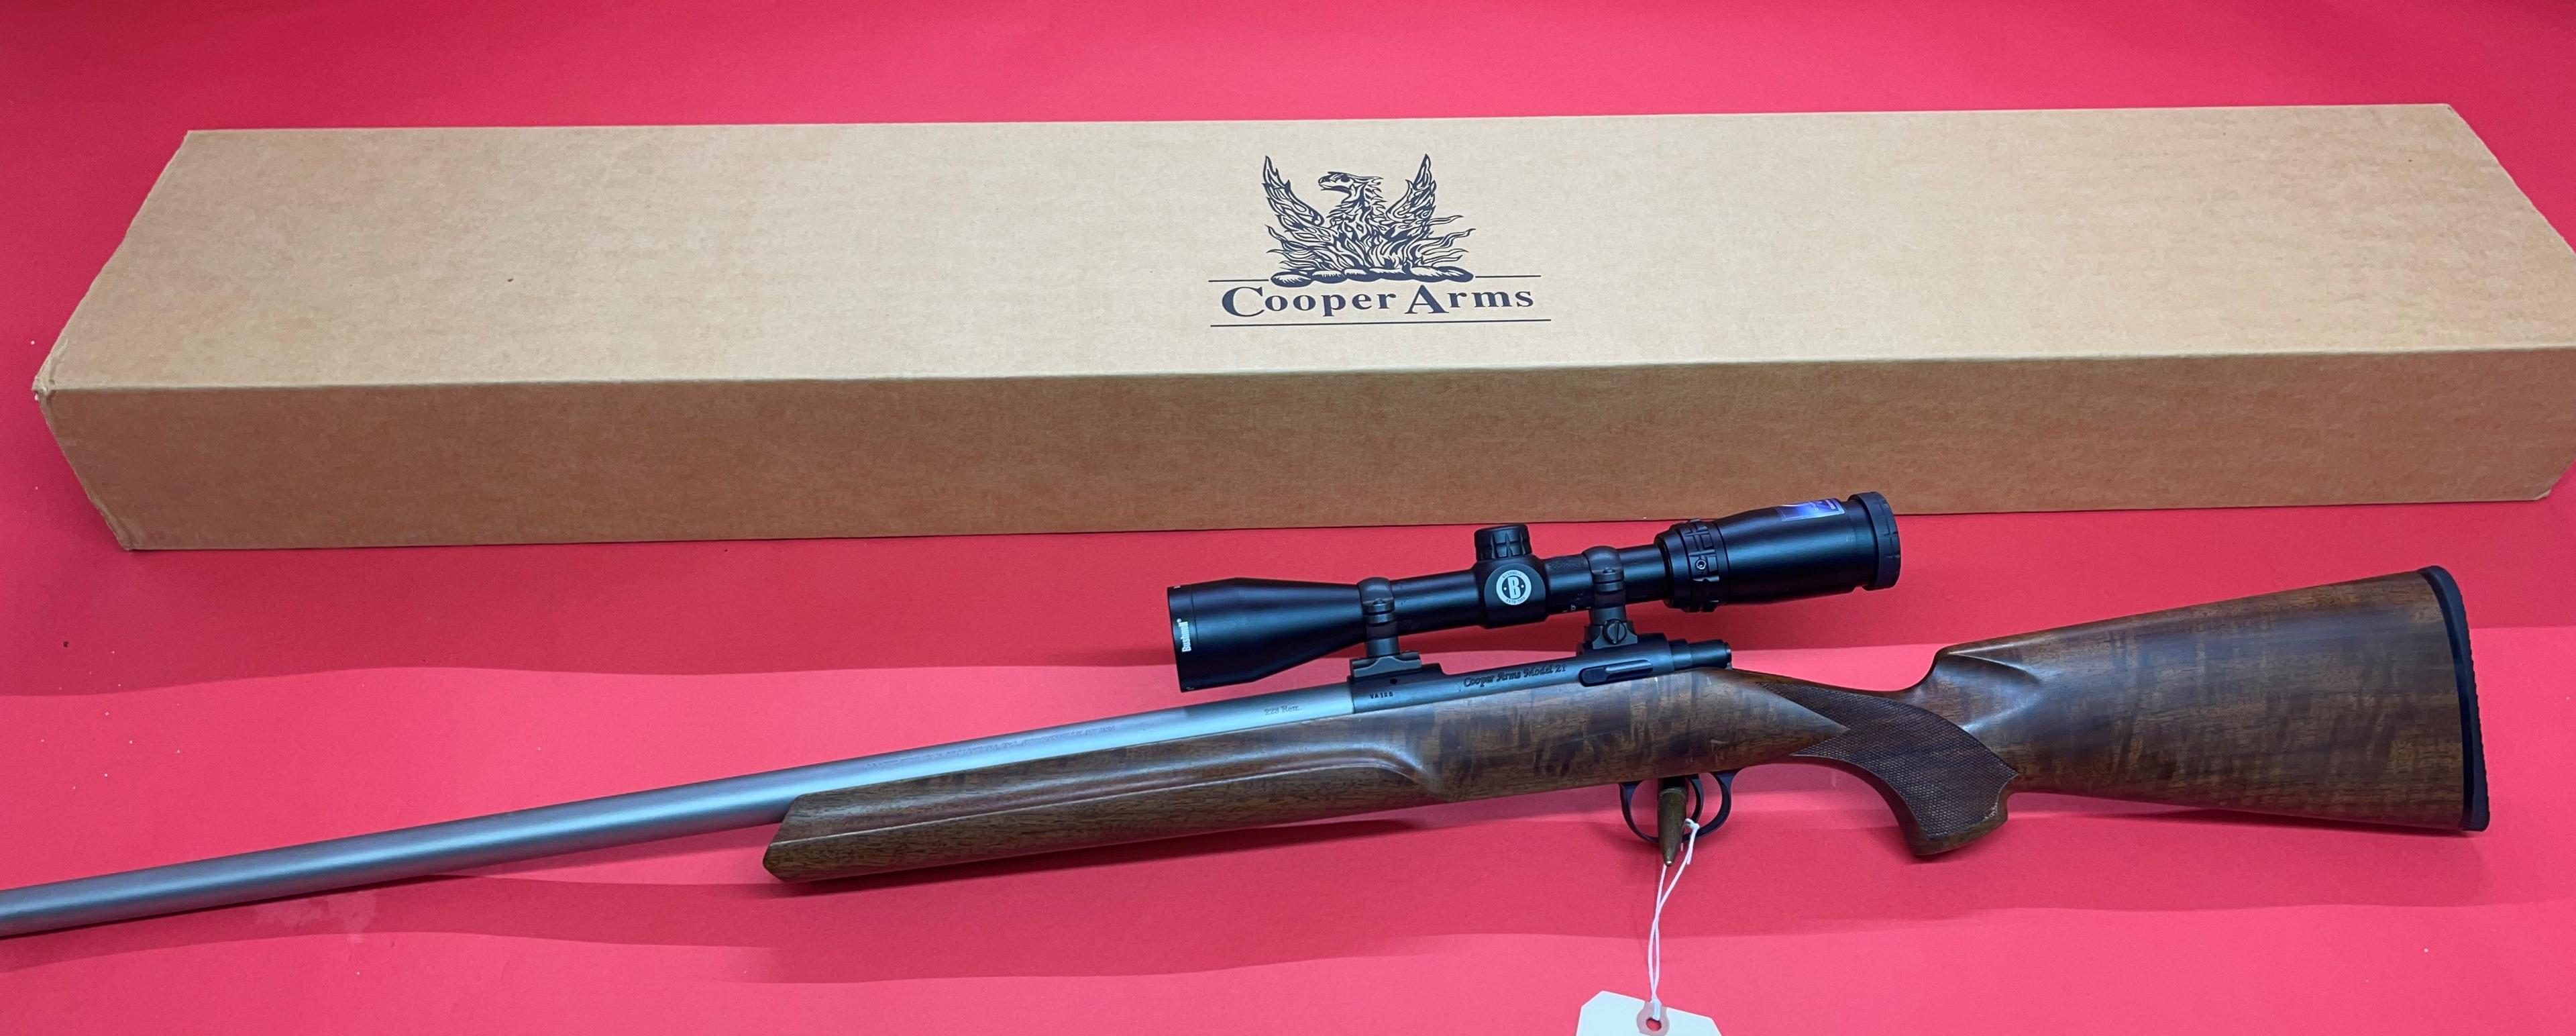 Cooper Arms 21 .223 Rifle